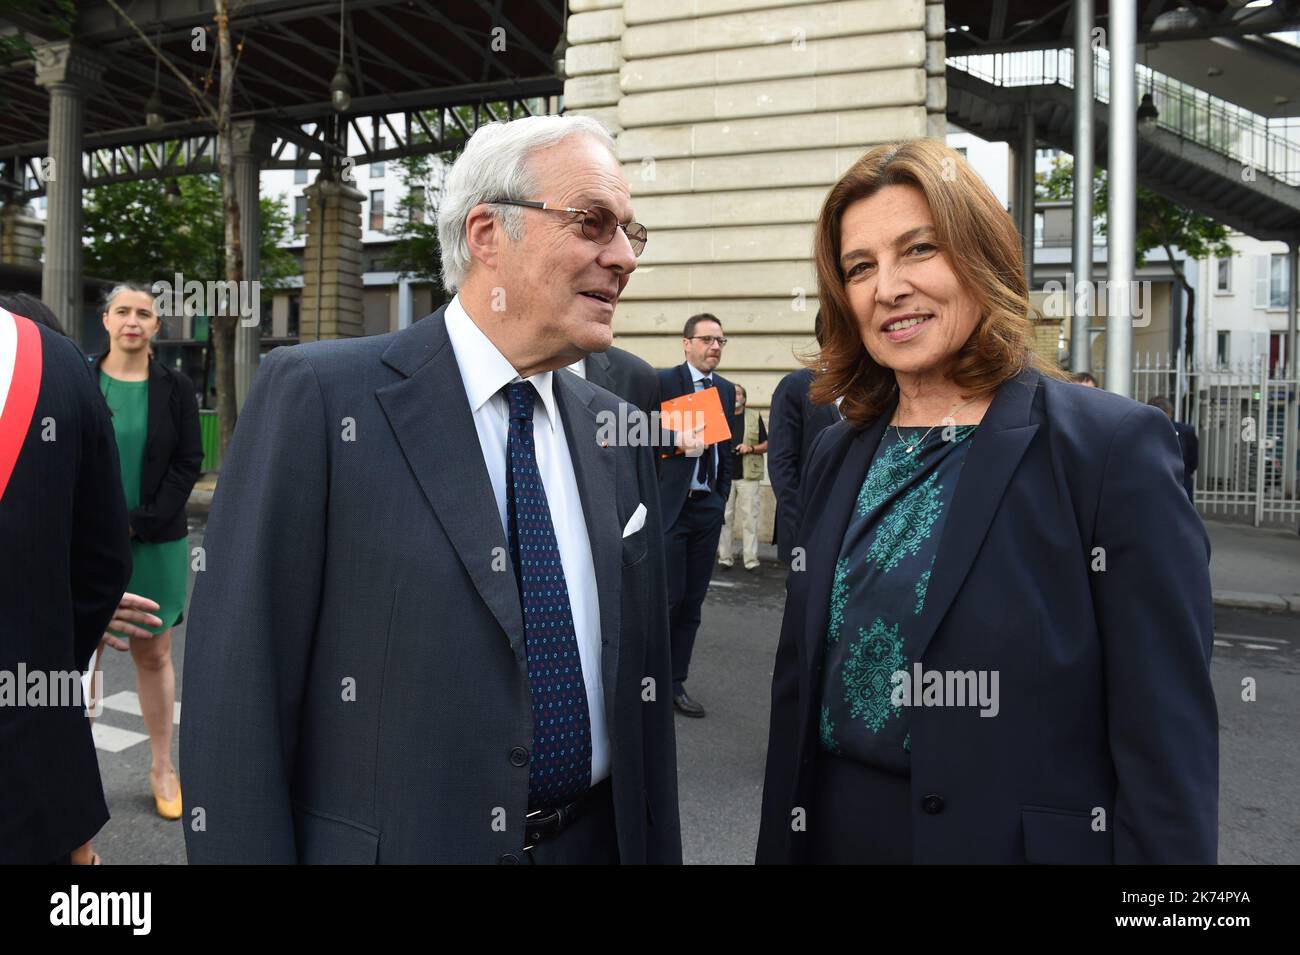 Ceremony commemorating the 75th anniversary of the Vel d'Hiv roundup French President Emmanuel Macron marked  75 years since the roundup of some 13,000 Jews to be sent to Nazi death camps. Eric de Rothschild and Aliza Bin Noun attend the ceremony of ' Velodrome d'Hiver ', Paris, France, 15/07/2017 POOL/Erez Lichtfeld/MAXPPP Stock Photo